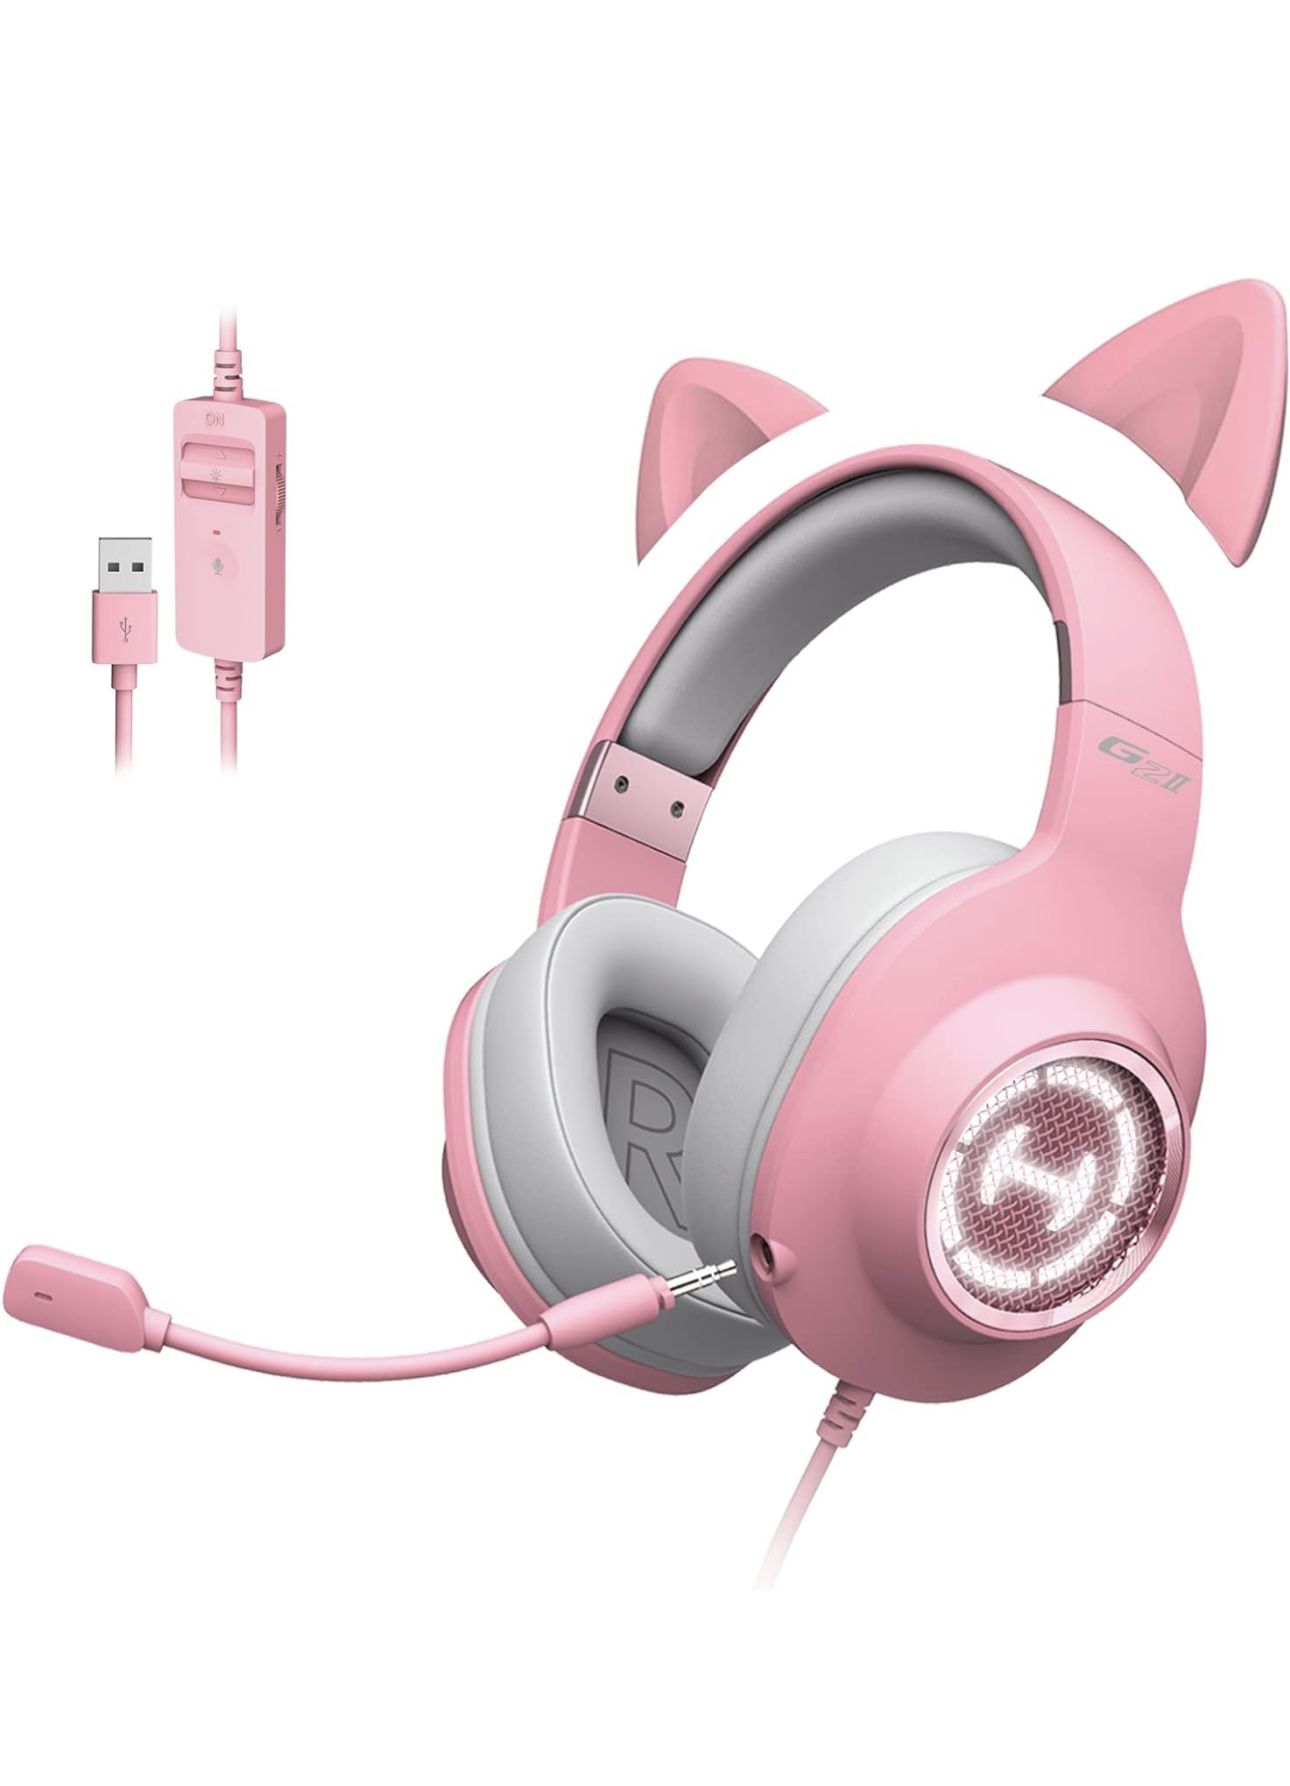 HECATE by Edifier G2 II Pink Gaming Headset, USB Wired Pink Gaming Headphones with Cat Ear for PC/MAC/PS4/PS5, 7.1 Surround Sound, Detachable Cat Ear 